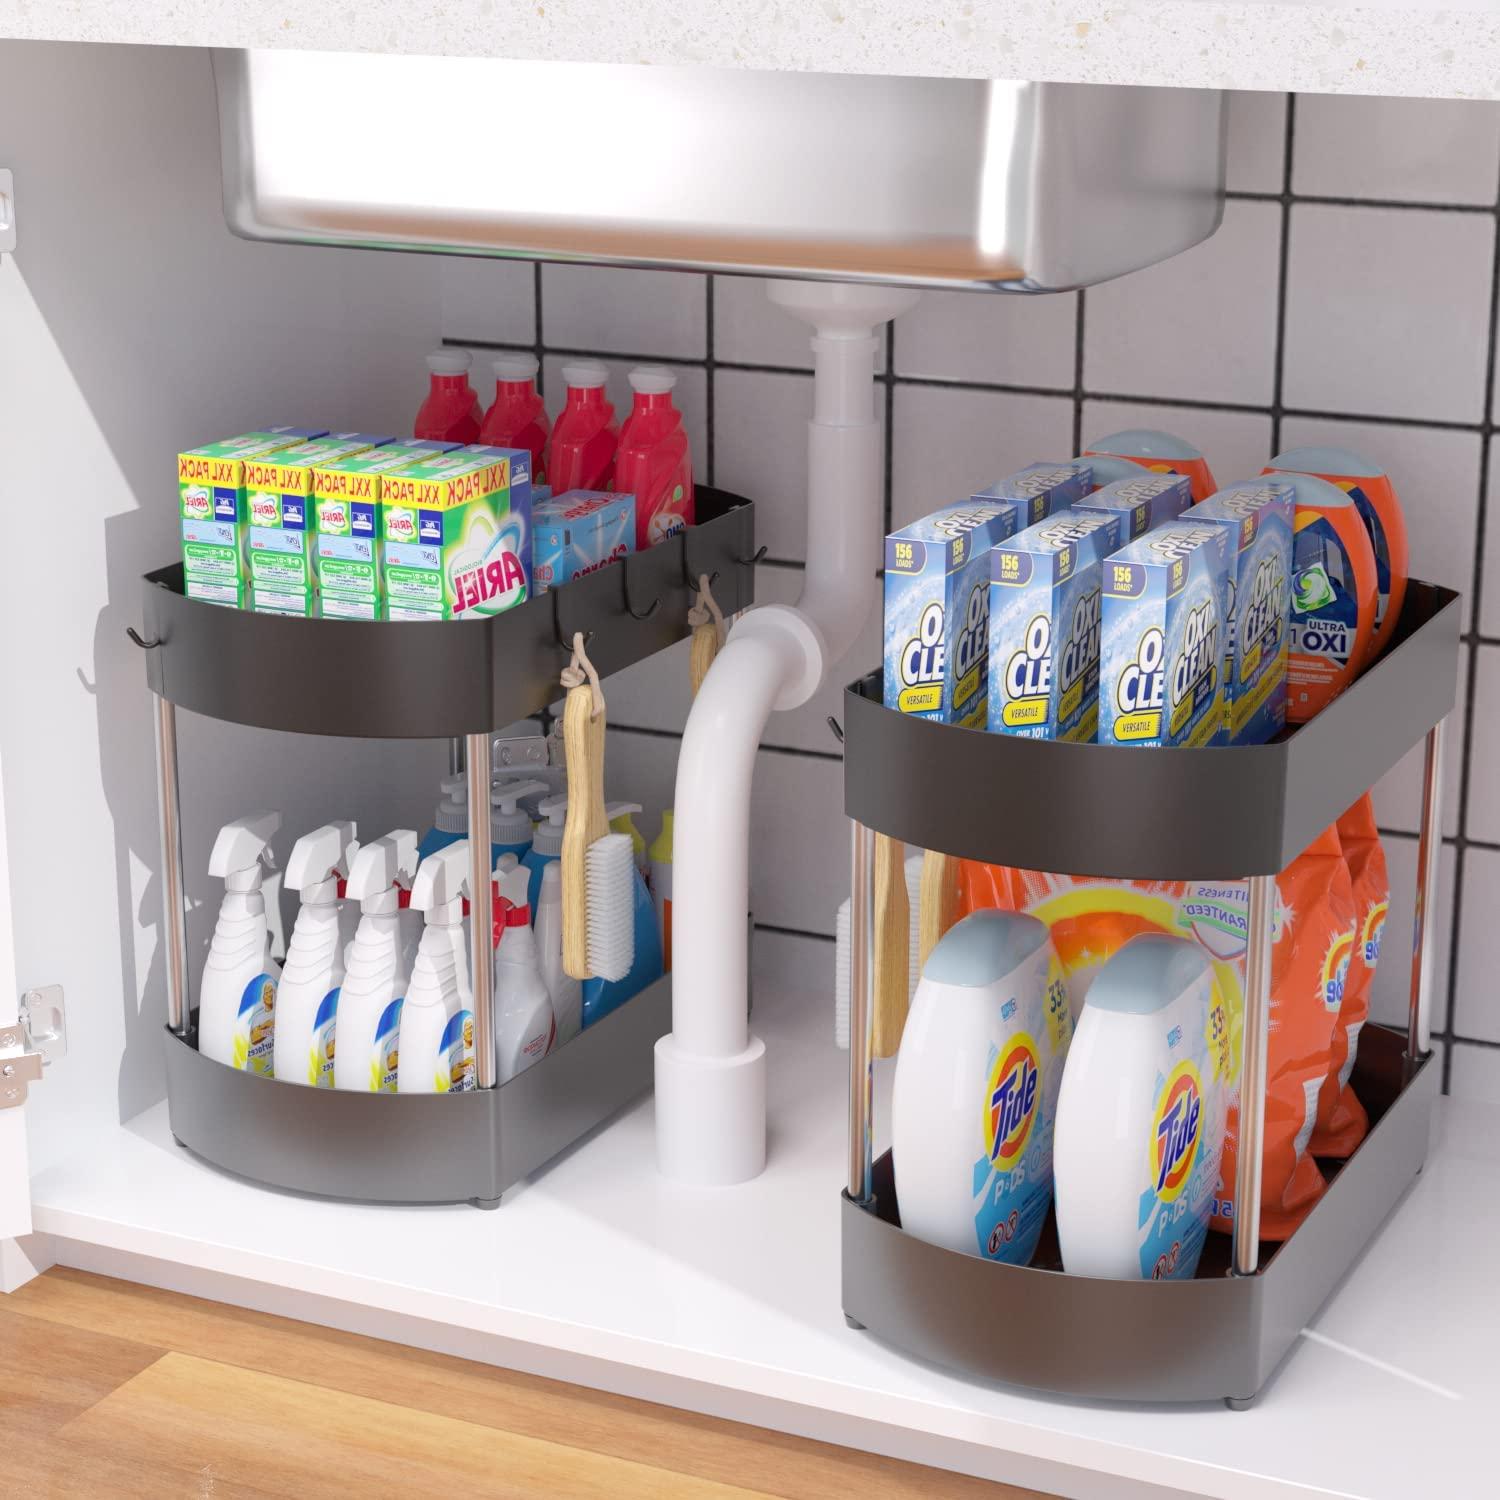 Under Sink Organizers and Storage 2 Pack for $15.99 Shipped